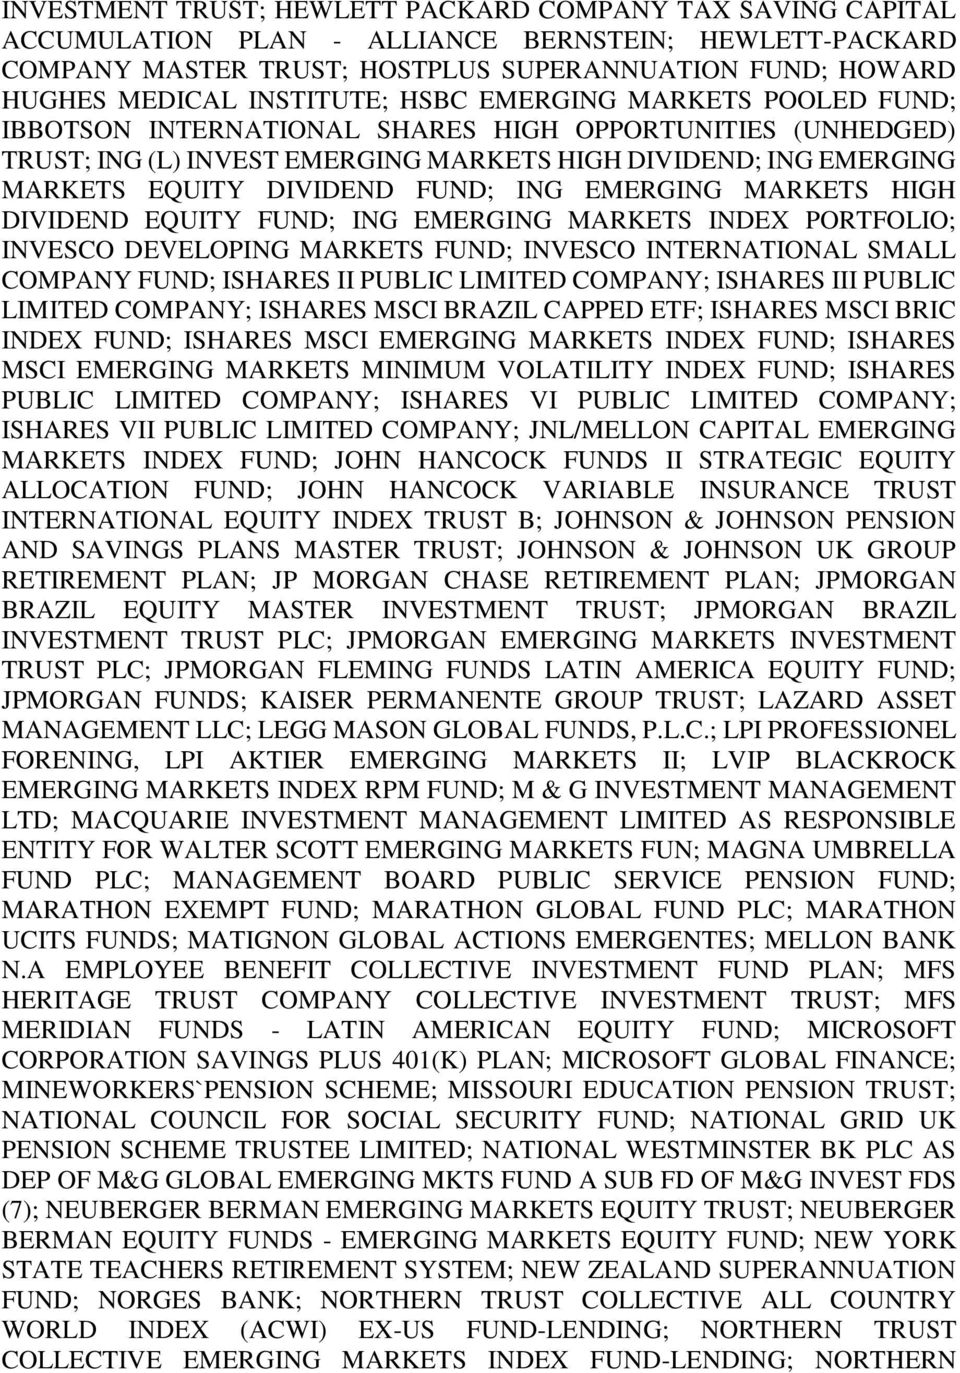 FUND; ING EMERGING MARKETS HIGH DIVIDEND EQUITY FUND; ING EMERGING MARKETS INDEX PORTFOLIO; INVESCO DEVELOPING MARKETS FUND; INVESCO INTERNATIONAL SMALL COMPANY FUND; ISHARES II PUBLIC LIMITED